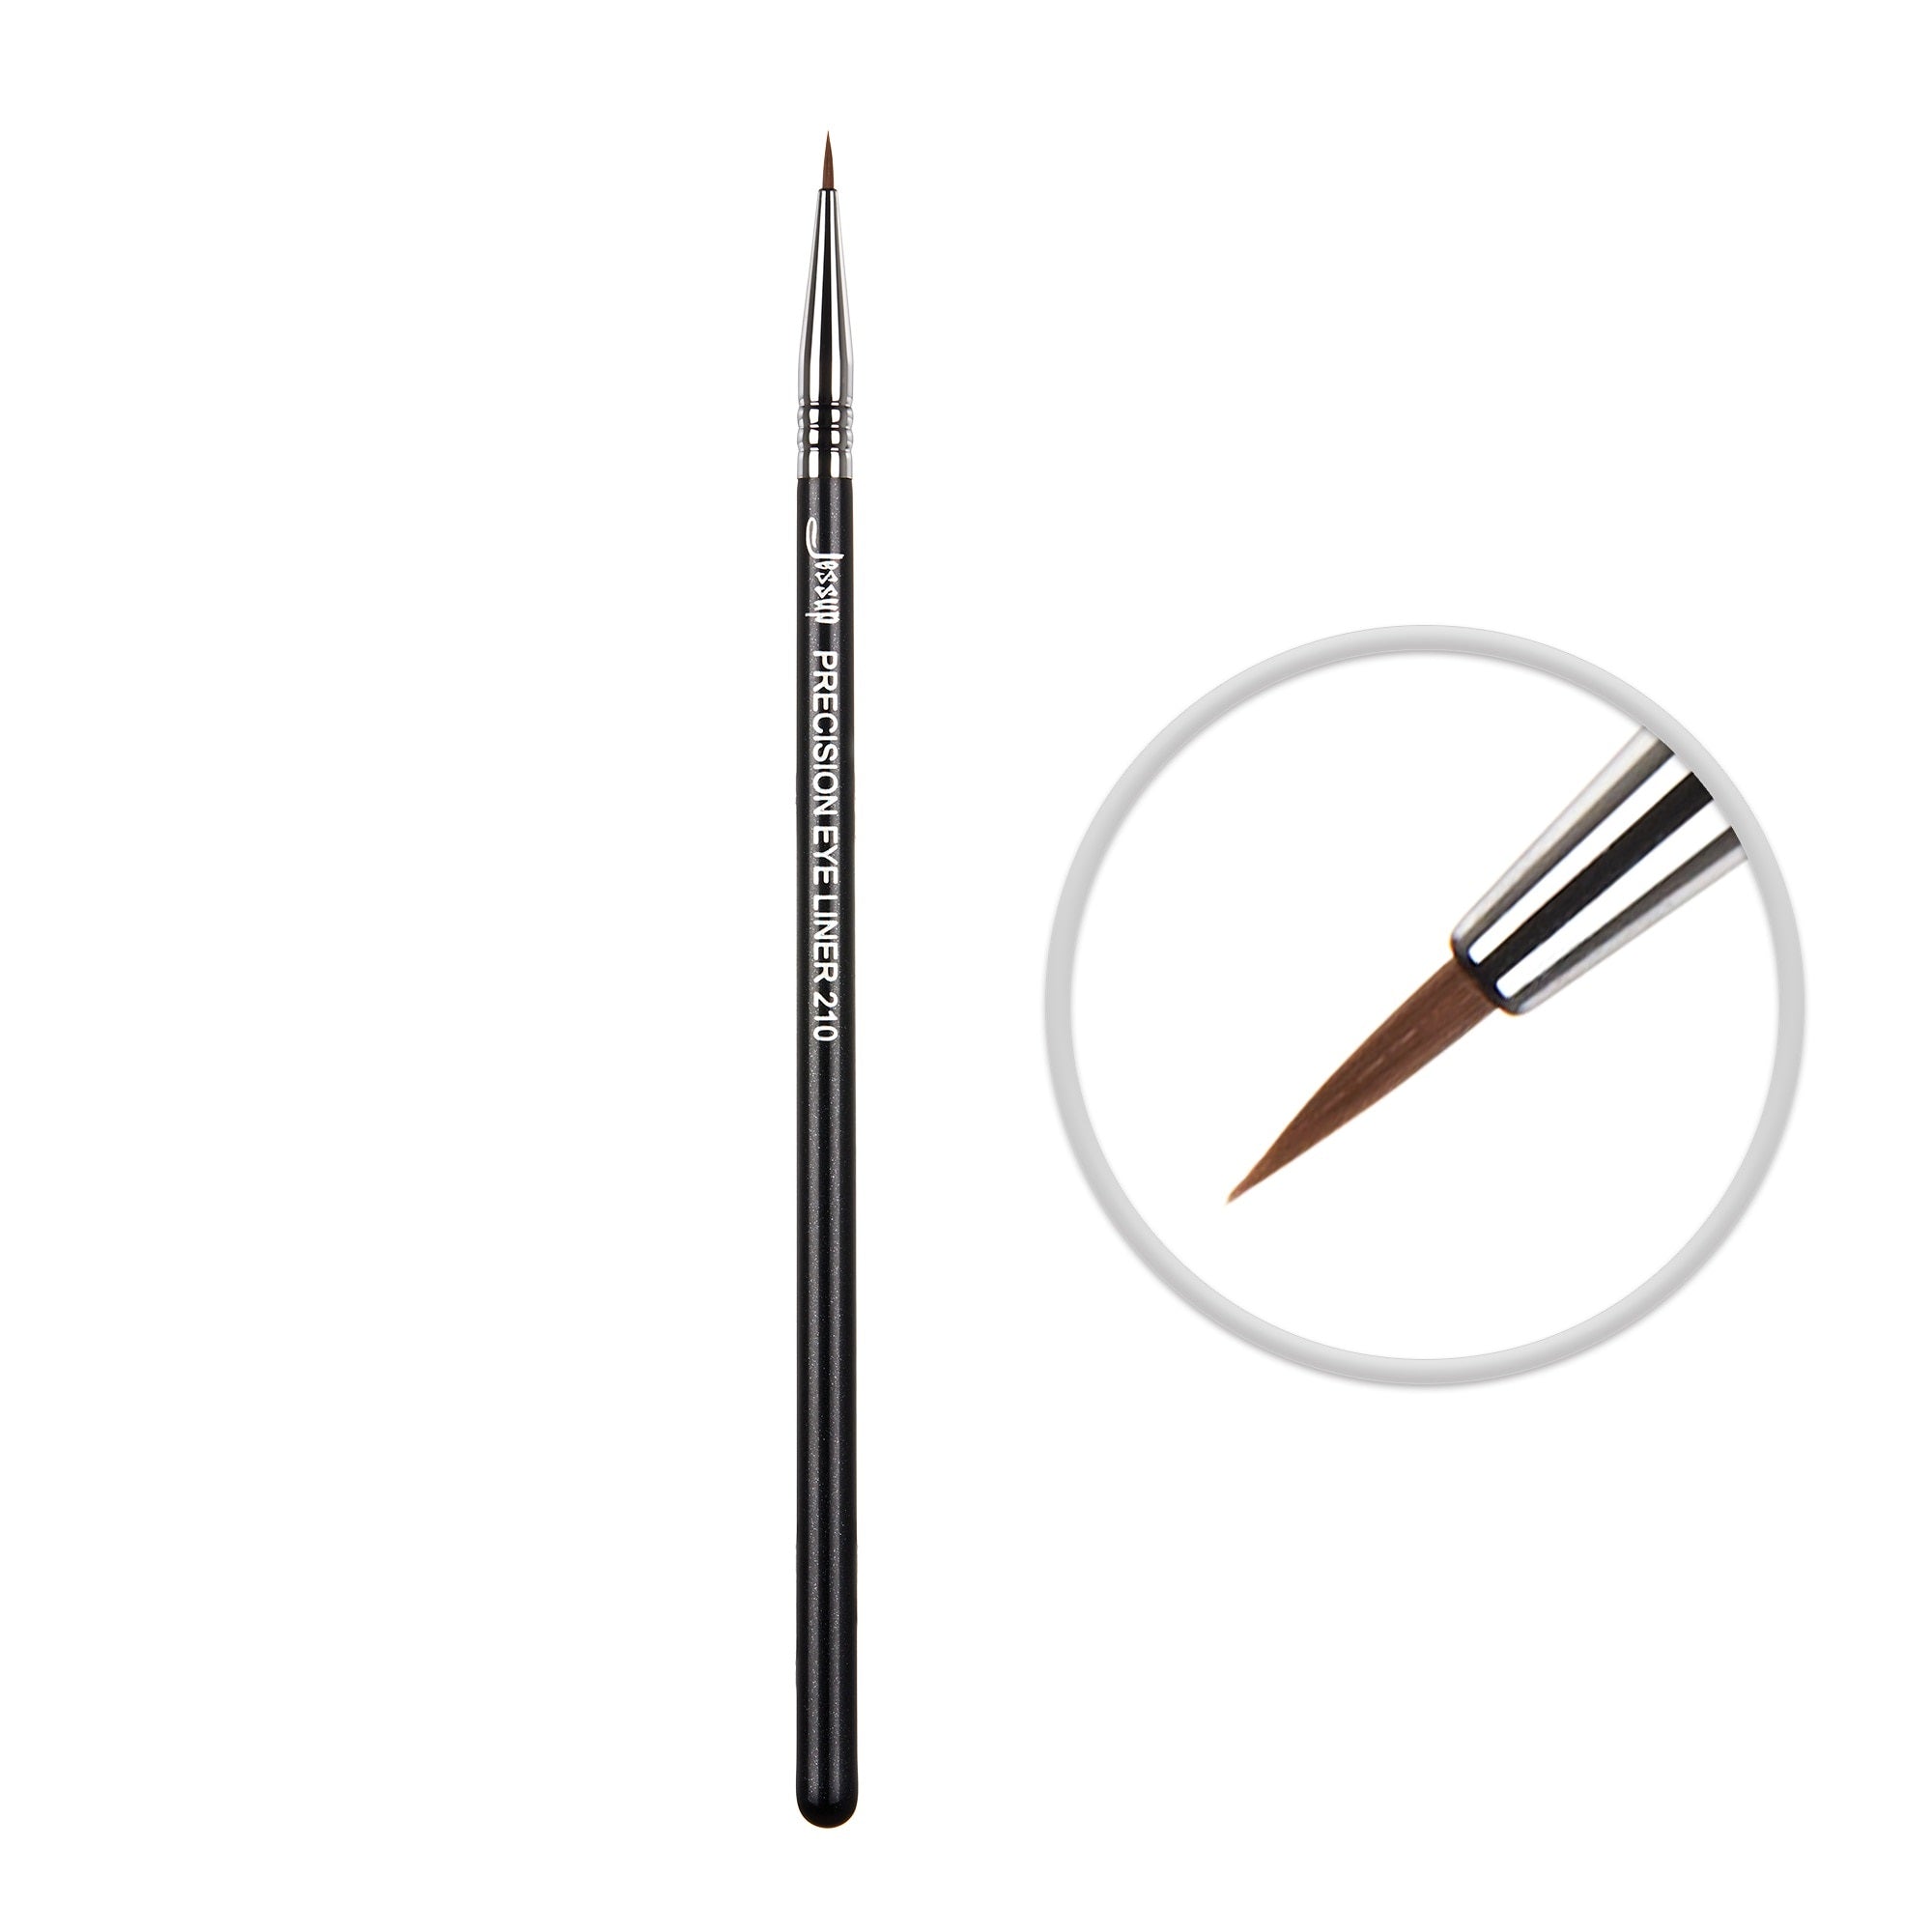 Eyeliner brush Black/Silver Precision makeup tools thin Professional Synthetic Hair Single Makeup brushes